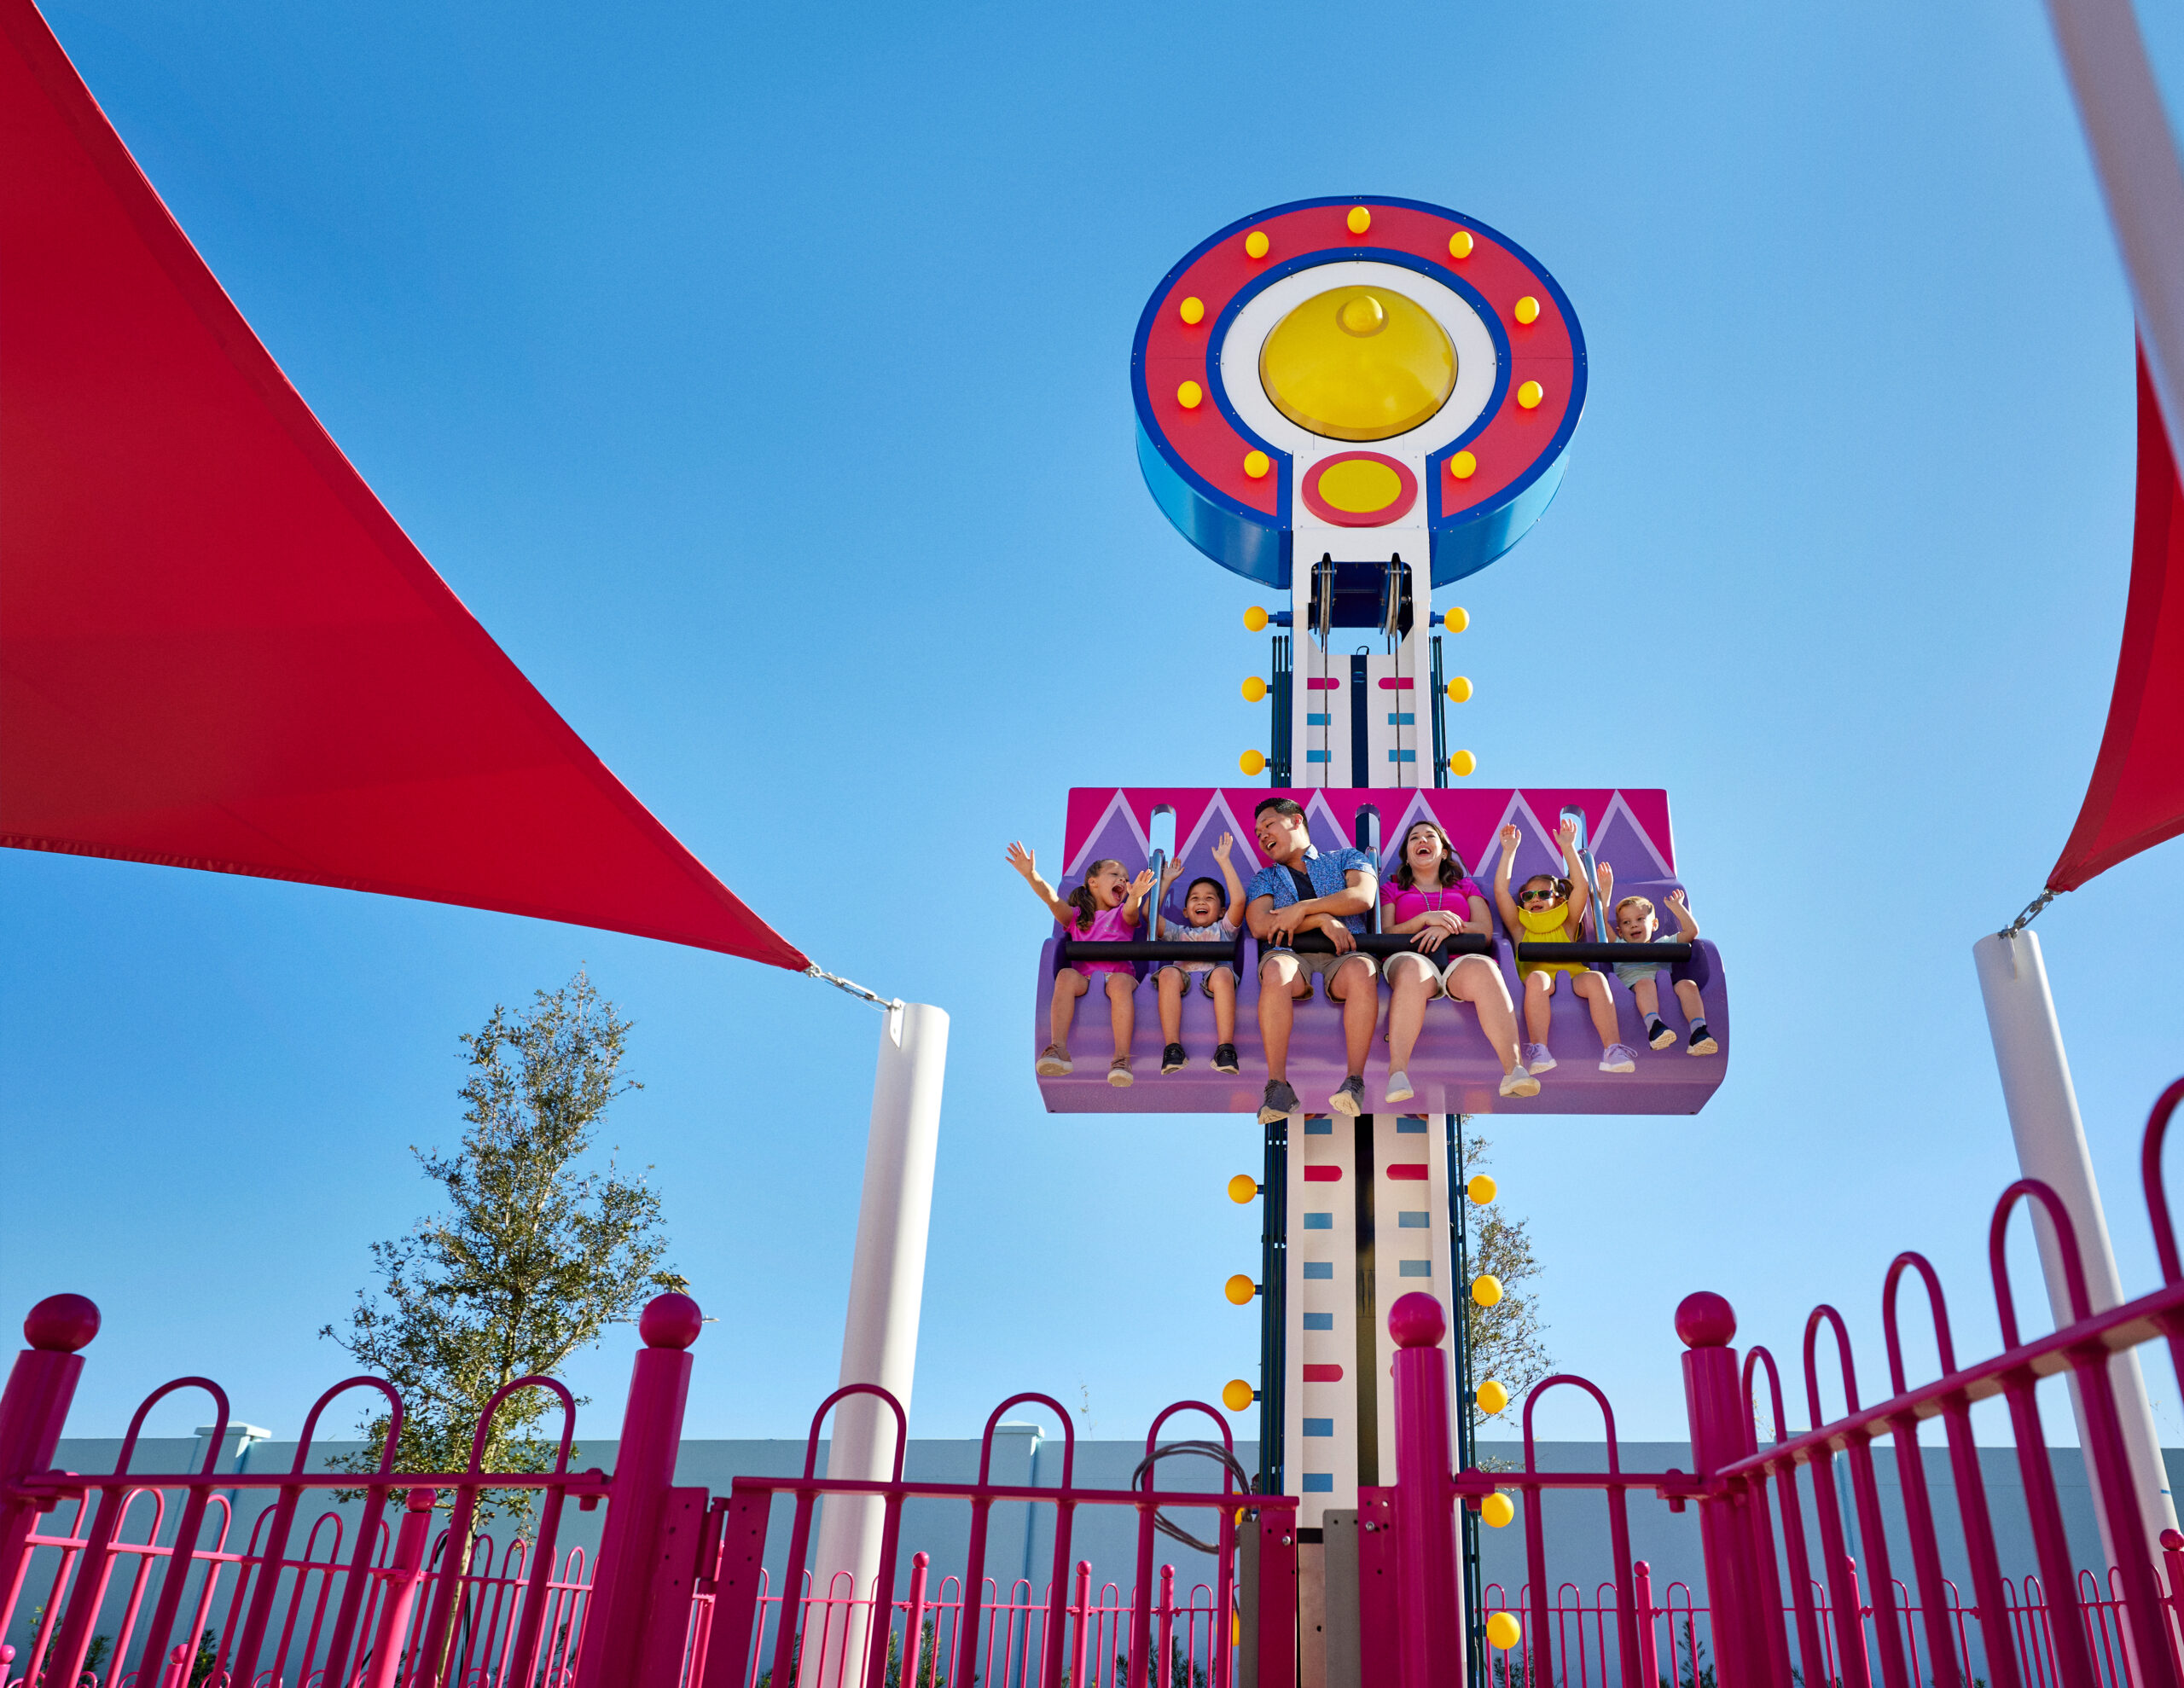 Mr. Bull's High Striker at the world's first peppa pig theme park